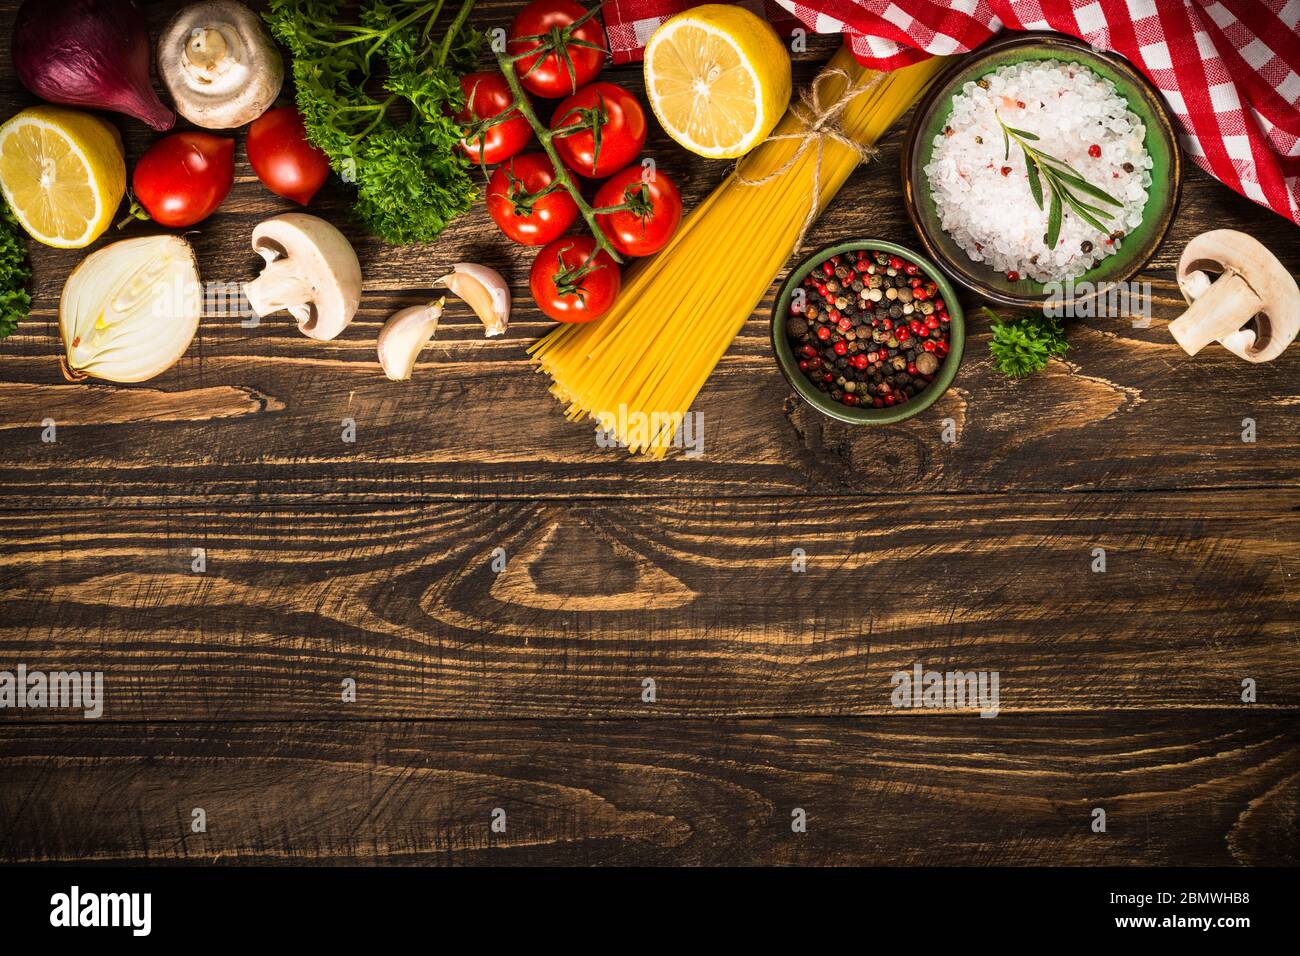 Food cooking background on wooden kitchen table Stock Photo - Alamy